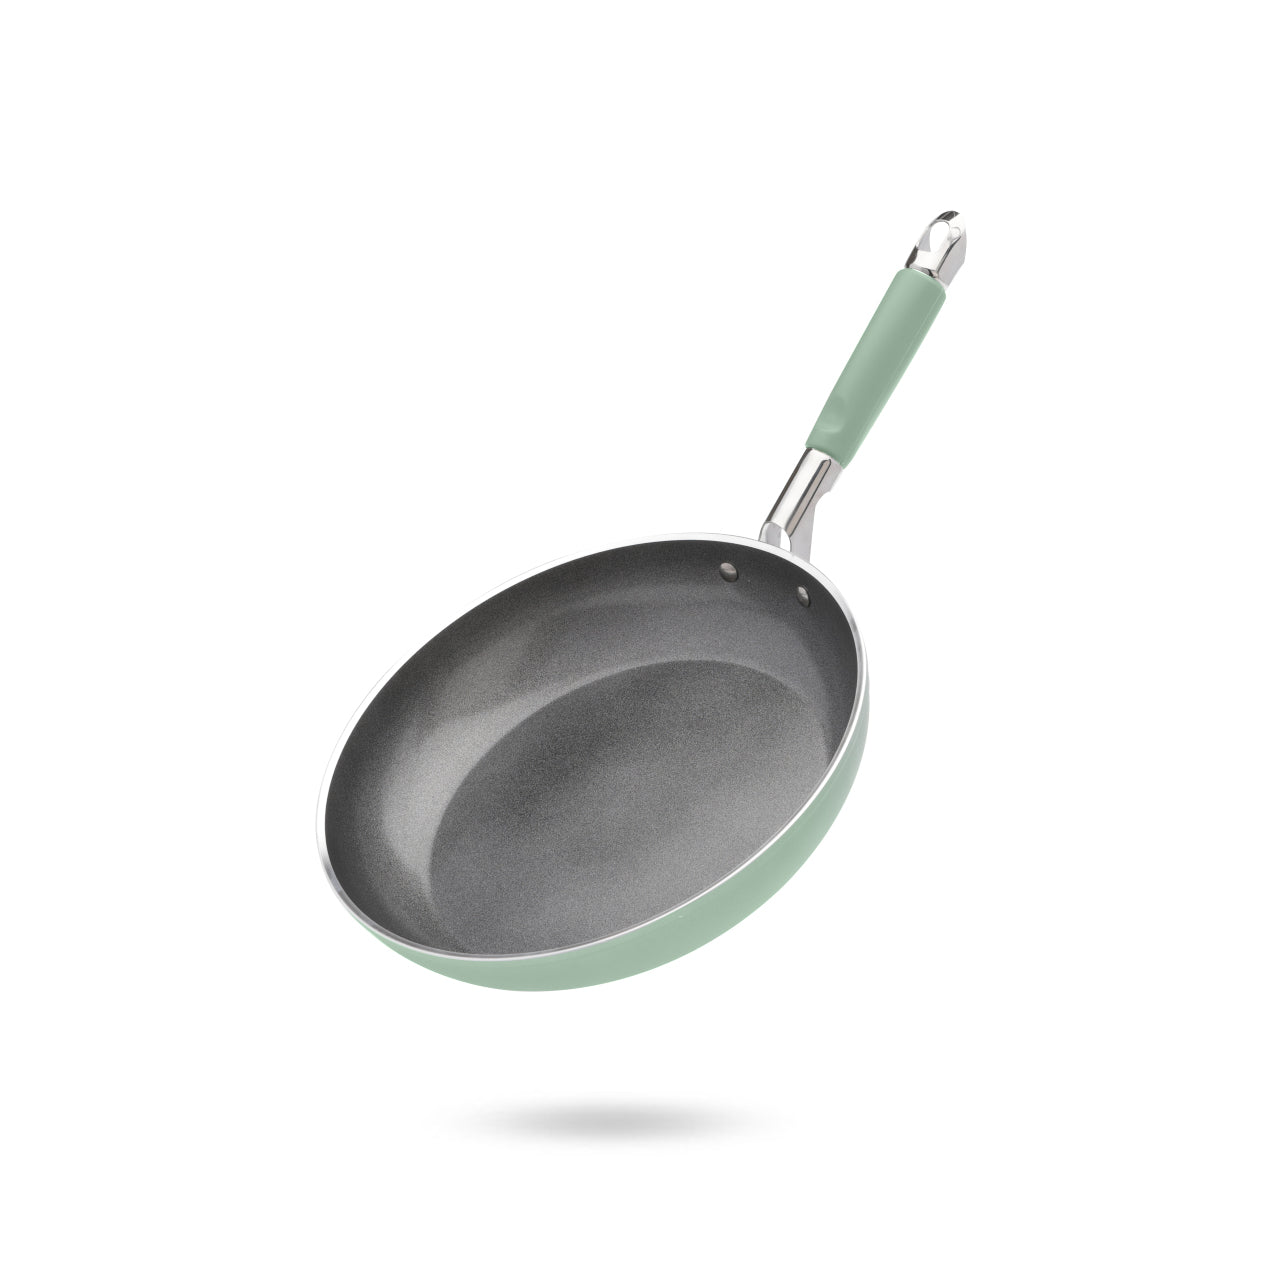 Shoppers Have Finally Discovered a Nonstick Frying Pan That